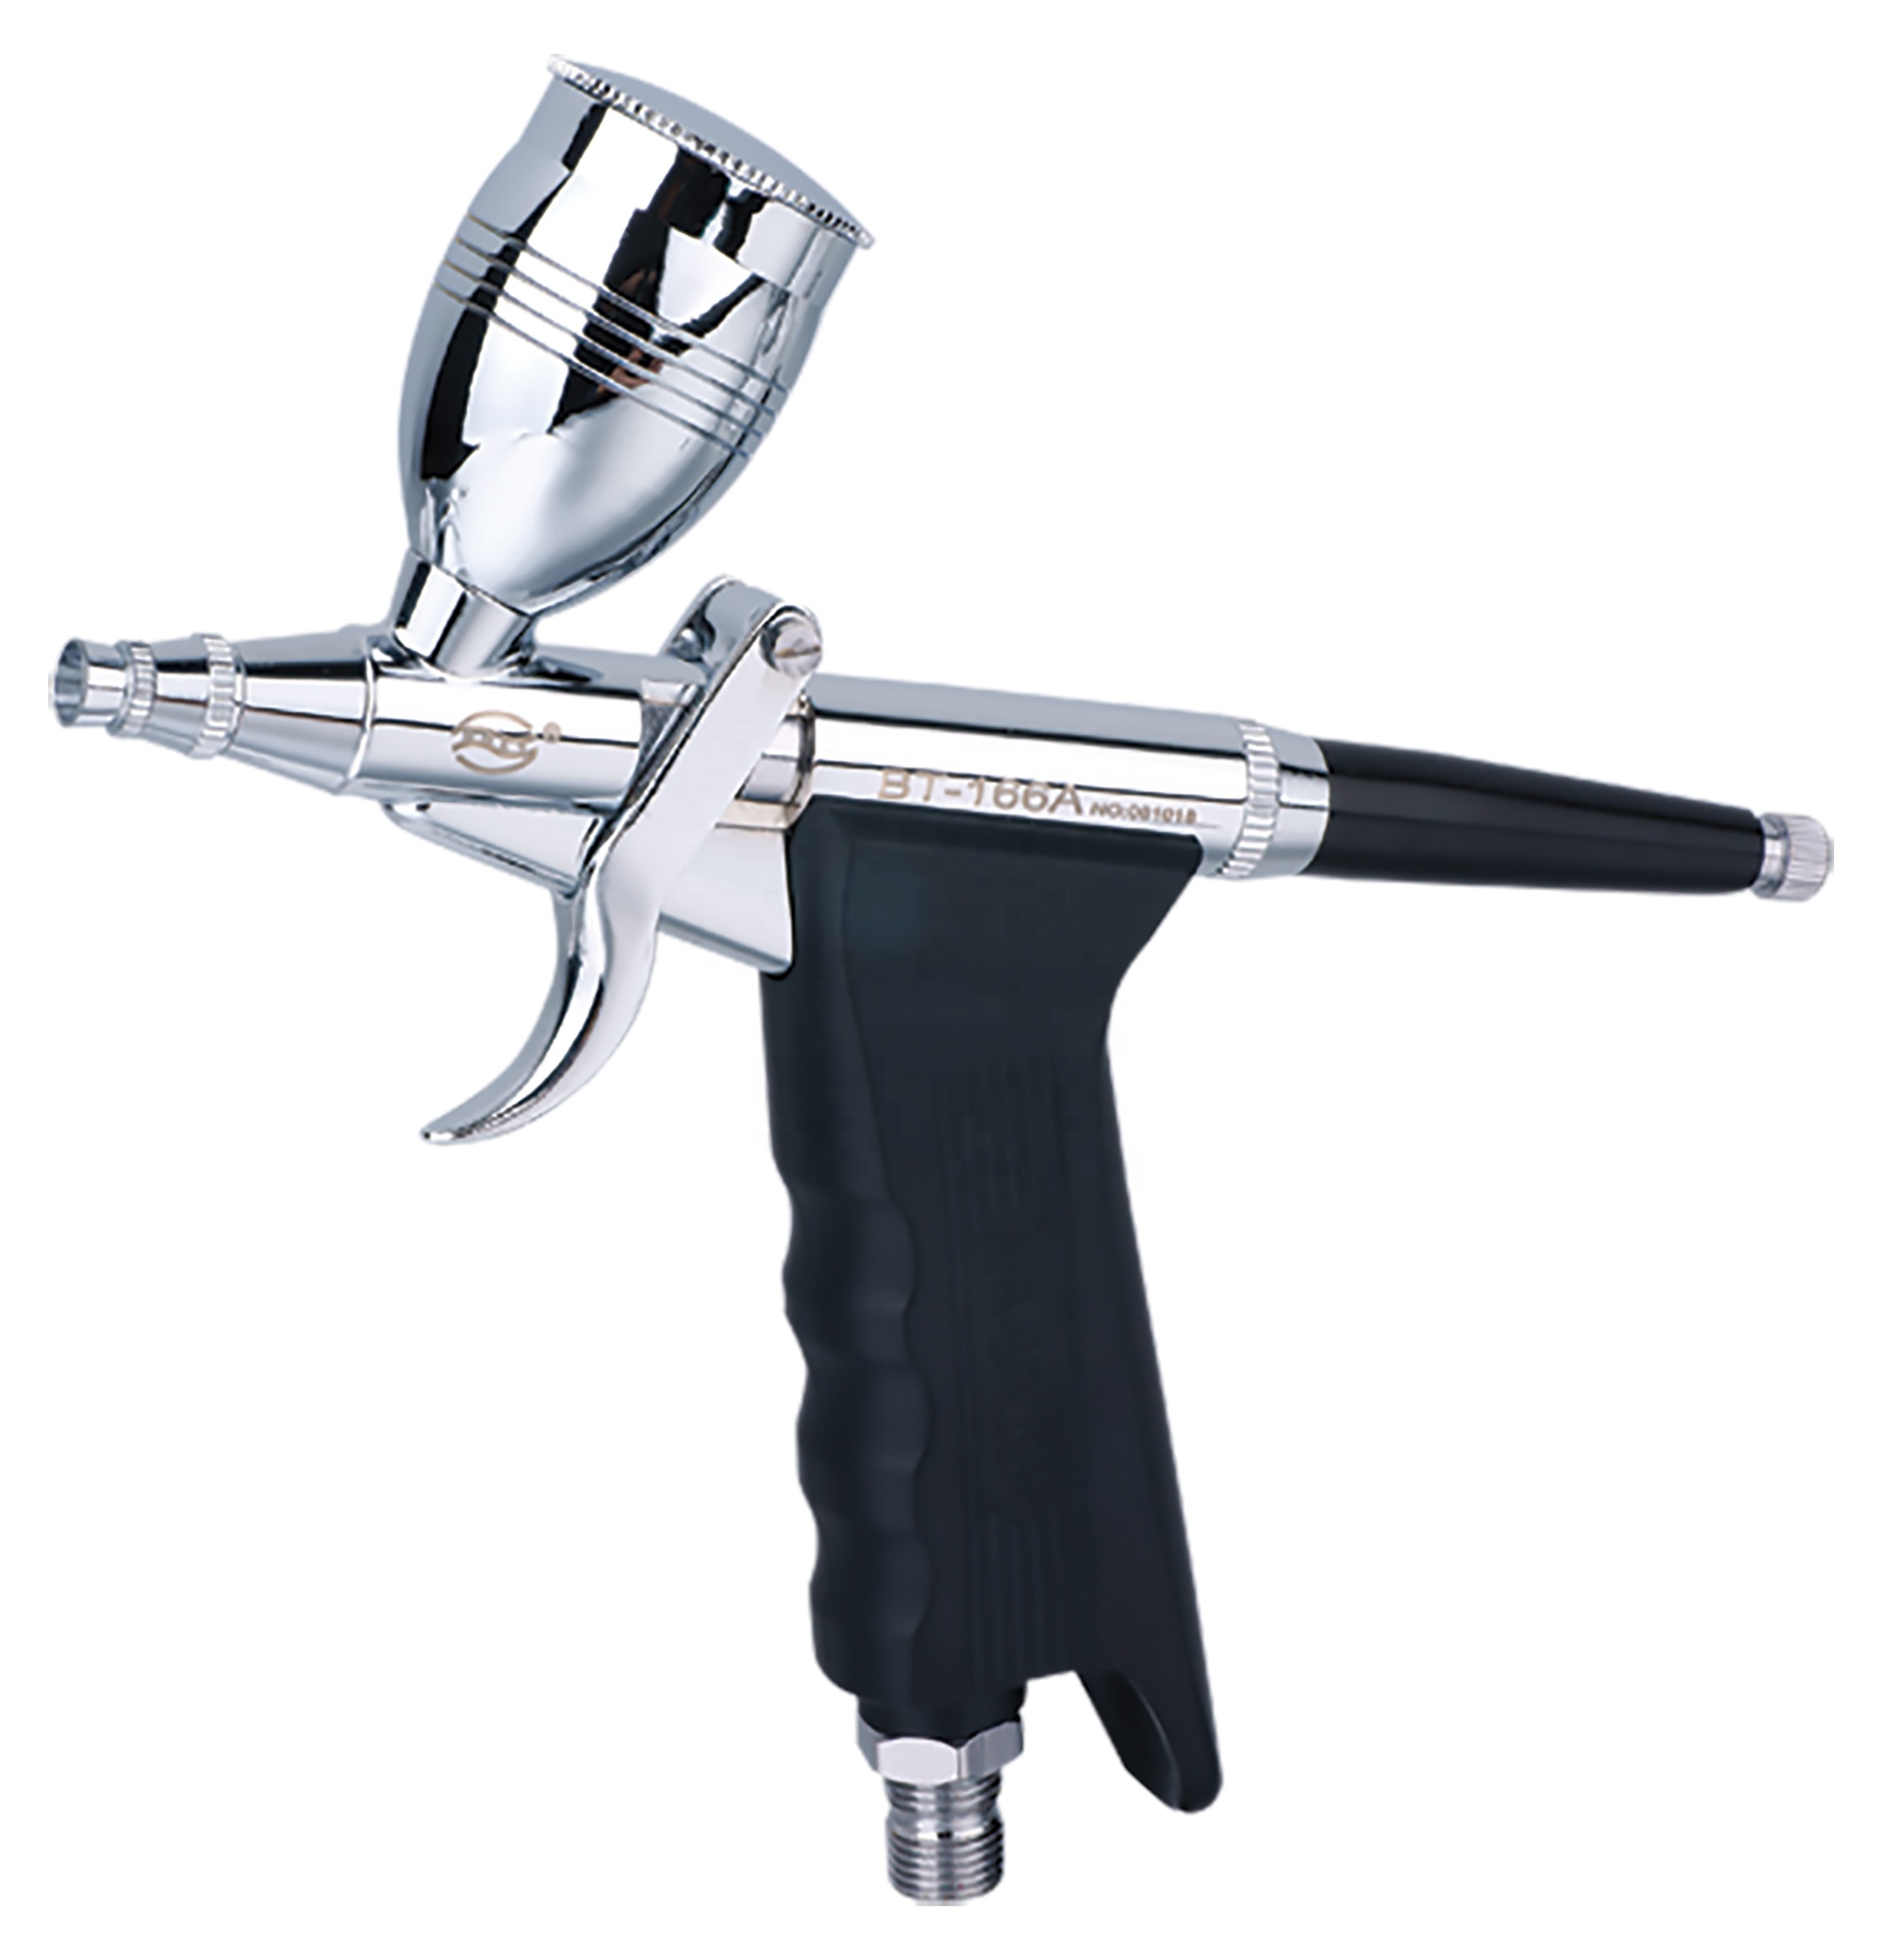 Double Action Gravity Feed  Spray Gun Used For Body Painting / Cake Decorating / Nail Painting Airbrush Gun